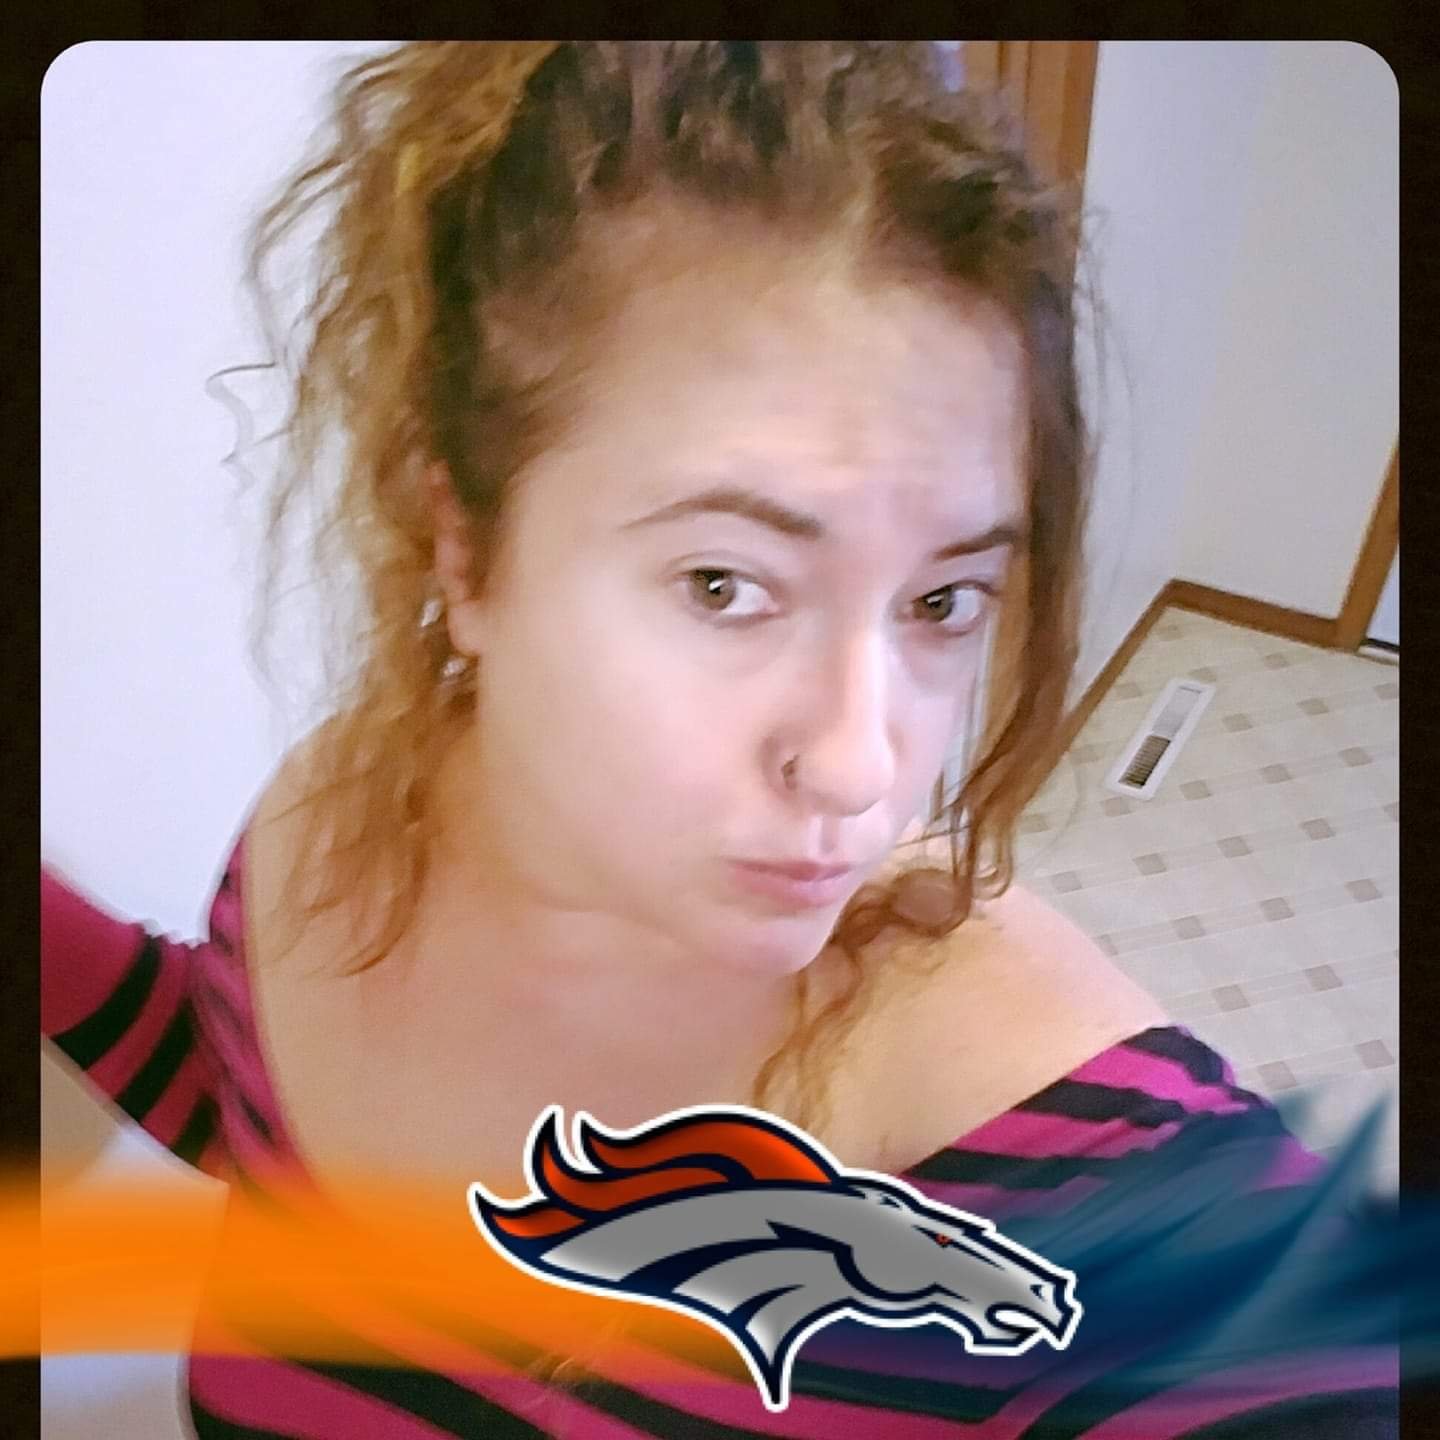 Die hard Denver Bronco's fan #DB4L my family is my priority ,outdoors , music / lyrics & tattoo's .quote : God first family second then denver broncos football